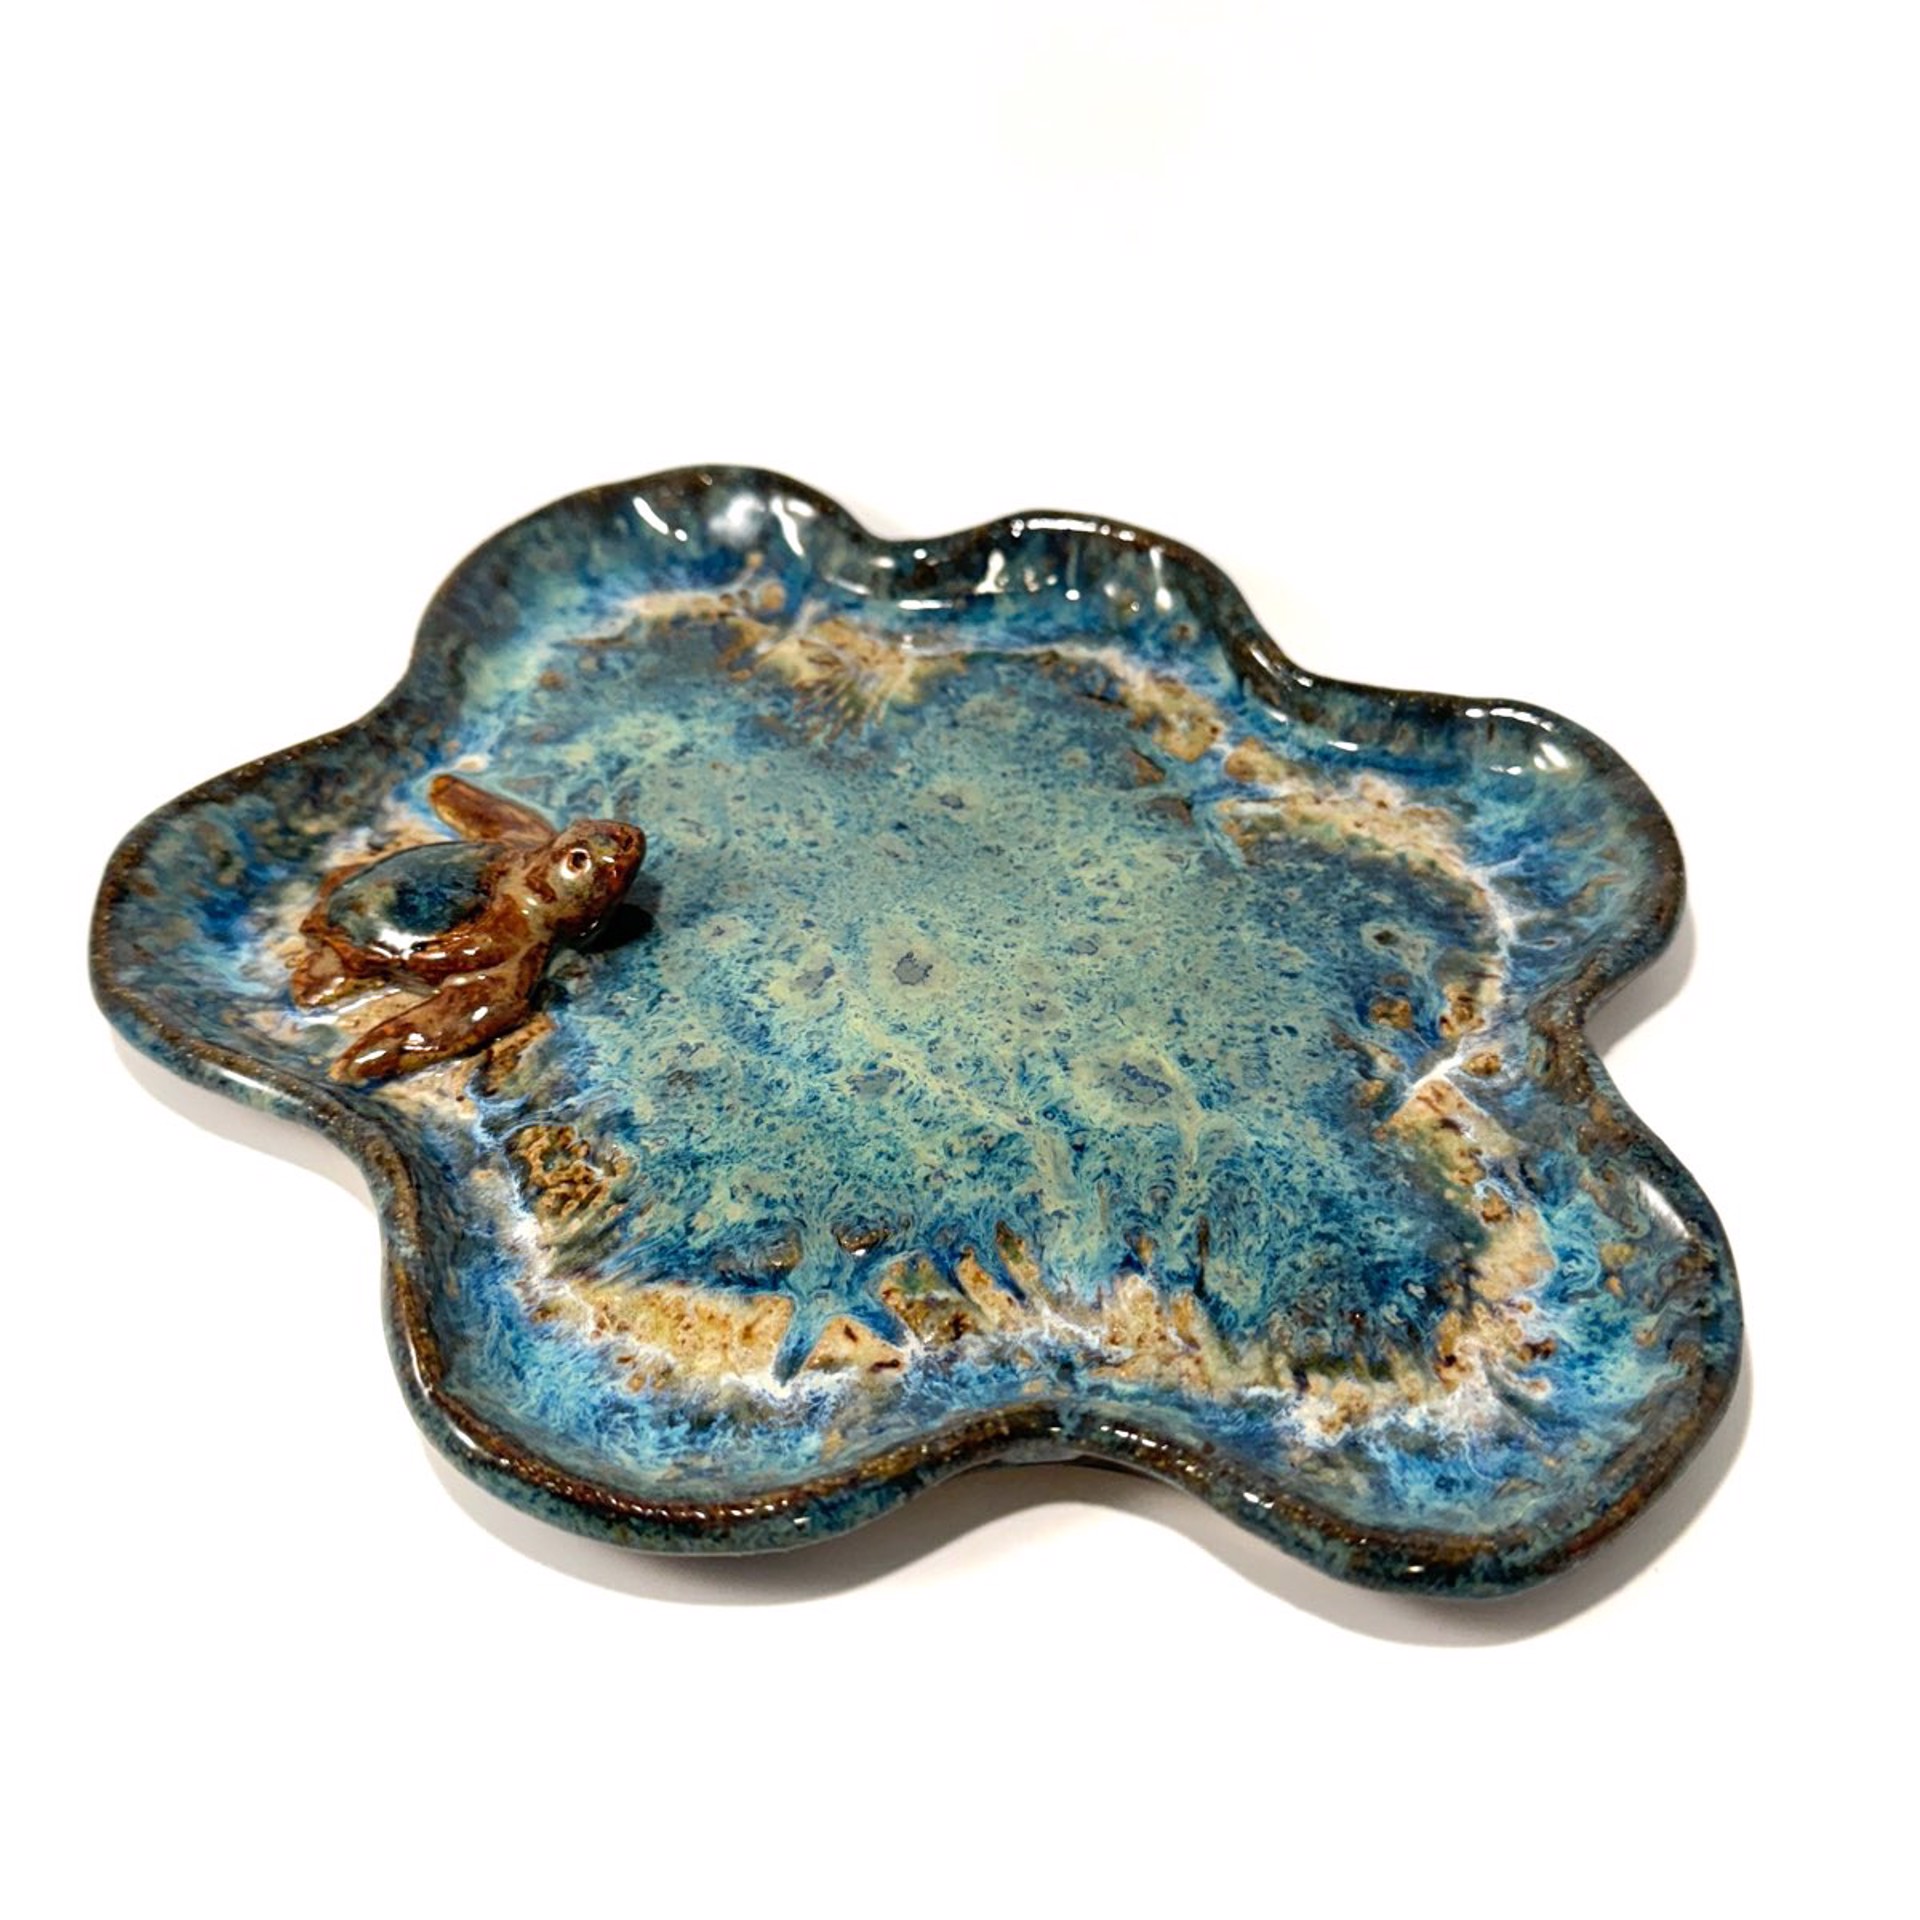 Plate with One Turtle (Blue Glaze) LG24-1225 by Jim & Steffi Logan